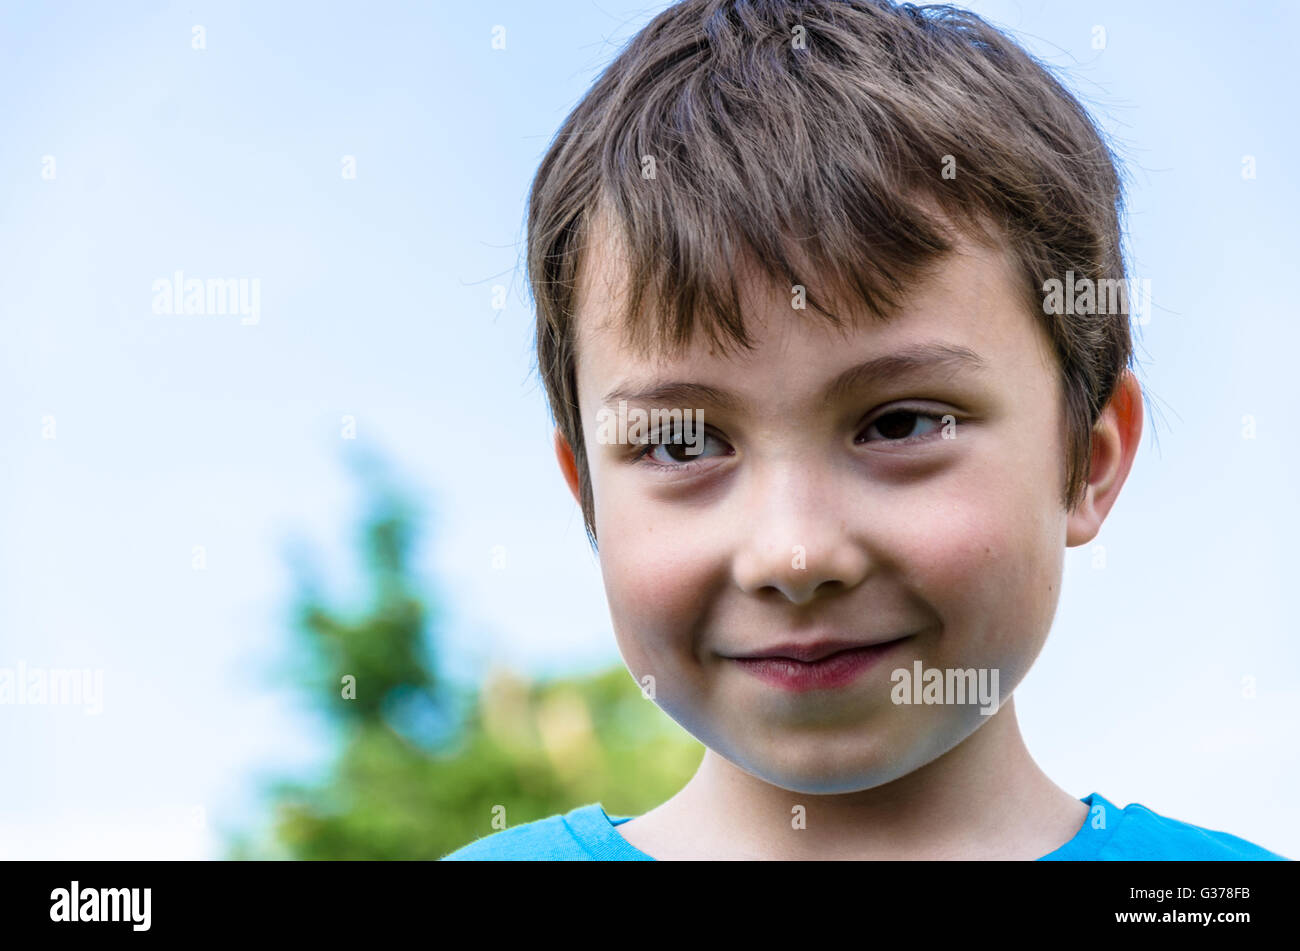 A portrait of a smiling young boy against a blue sky. Stock Photo